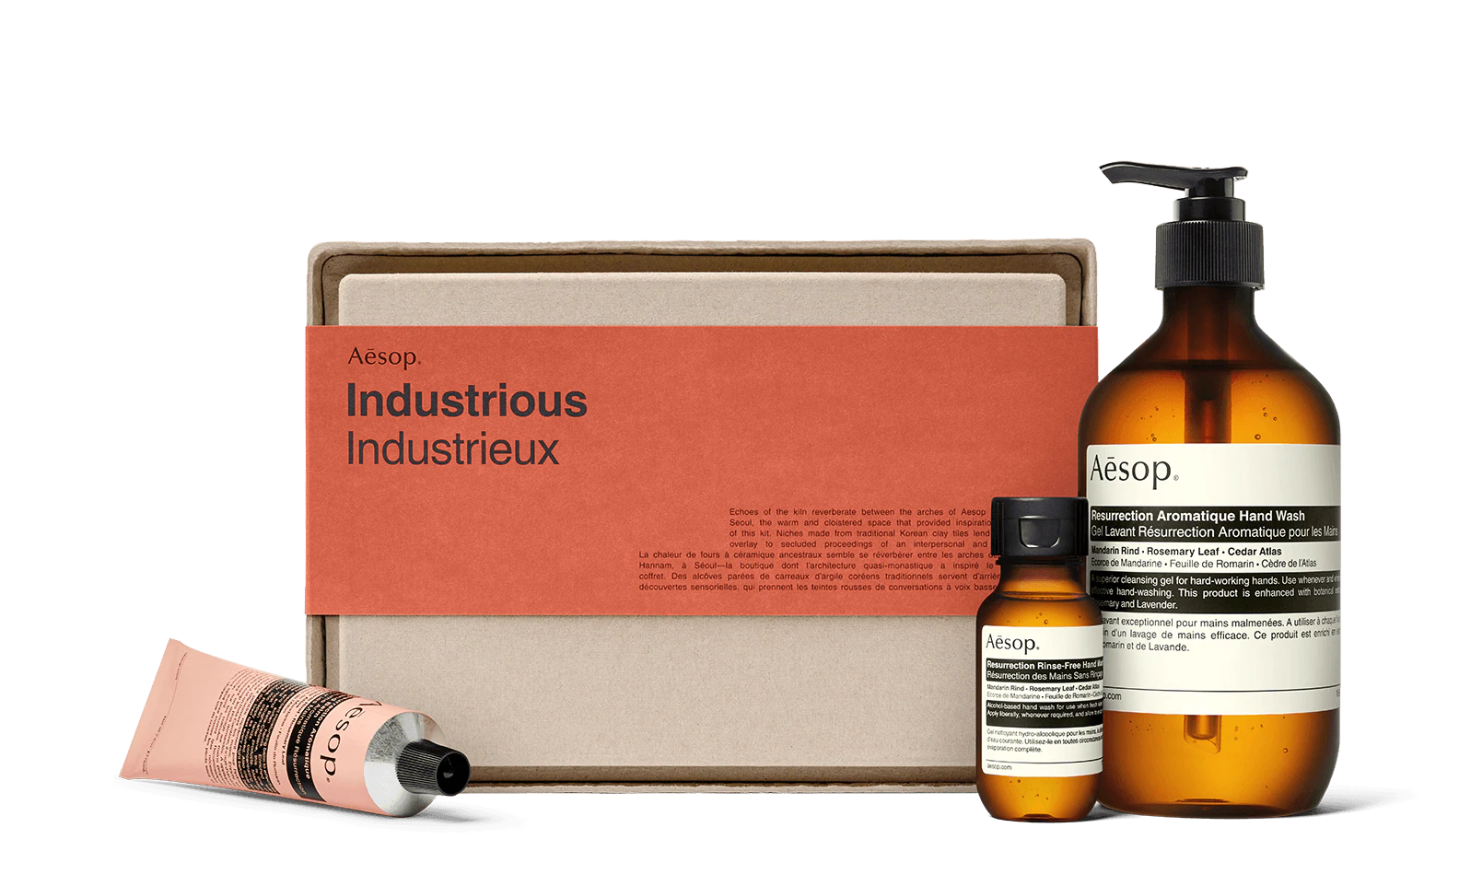 aesop industrious kit including the hand wash, hand sanitizer, and hand balm in front of the gift box